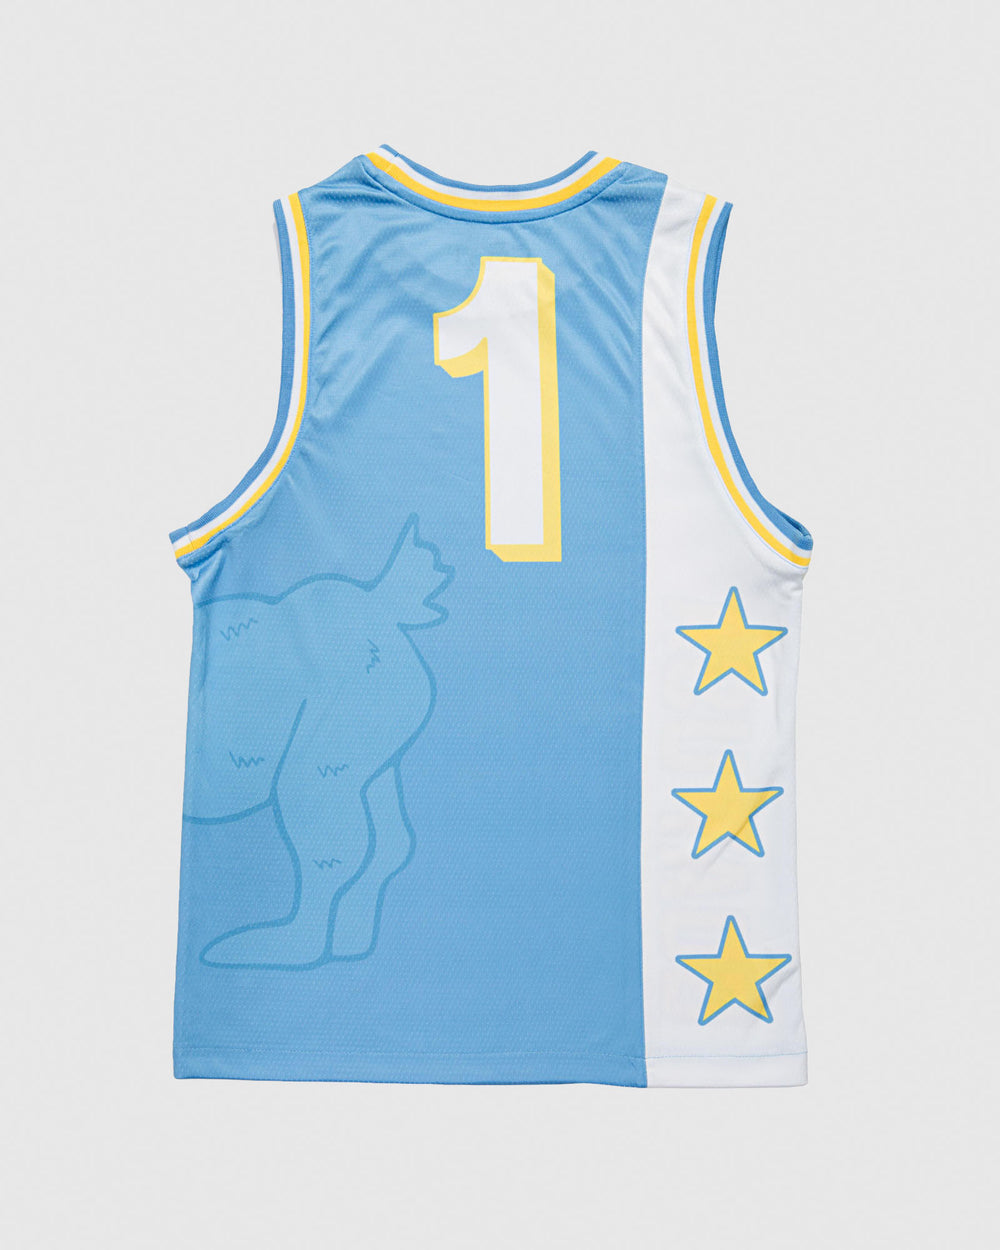 Back of carolina blue, white and gold jersey with goat design that wraps around